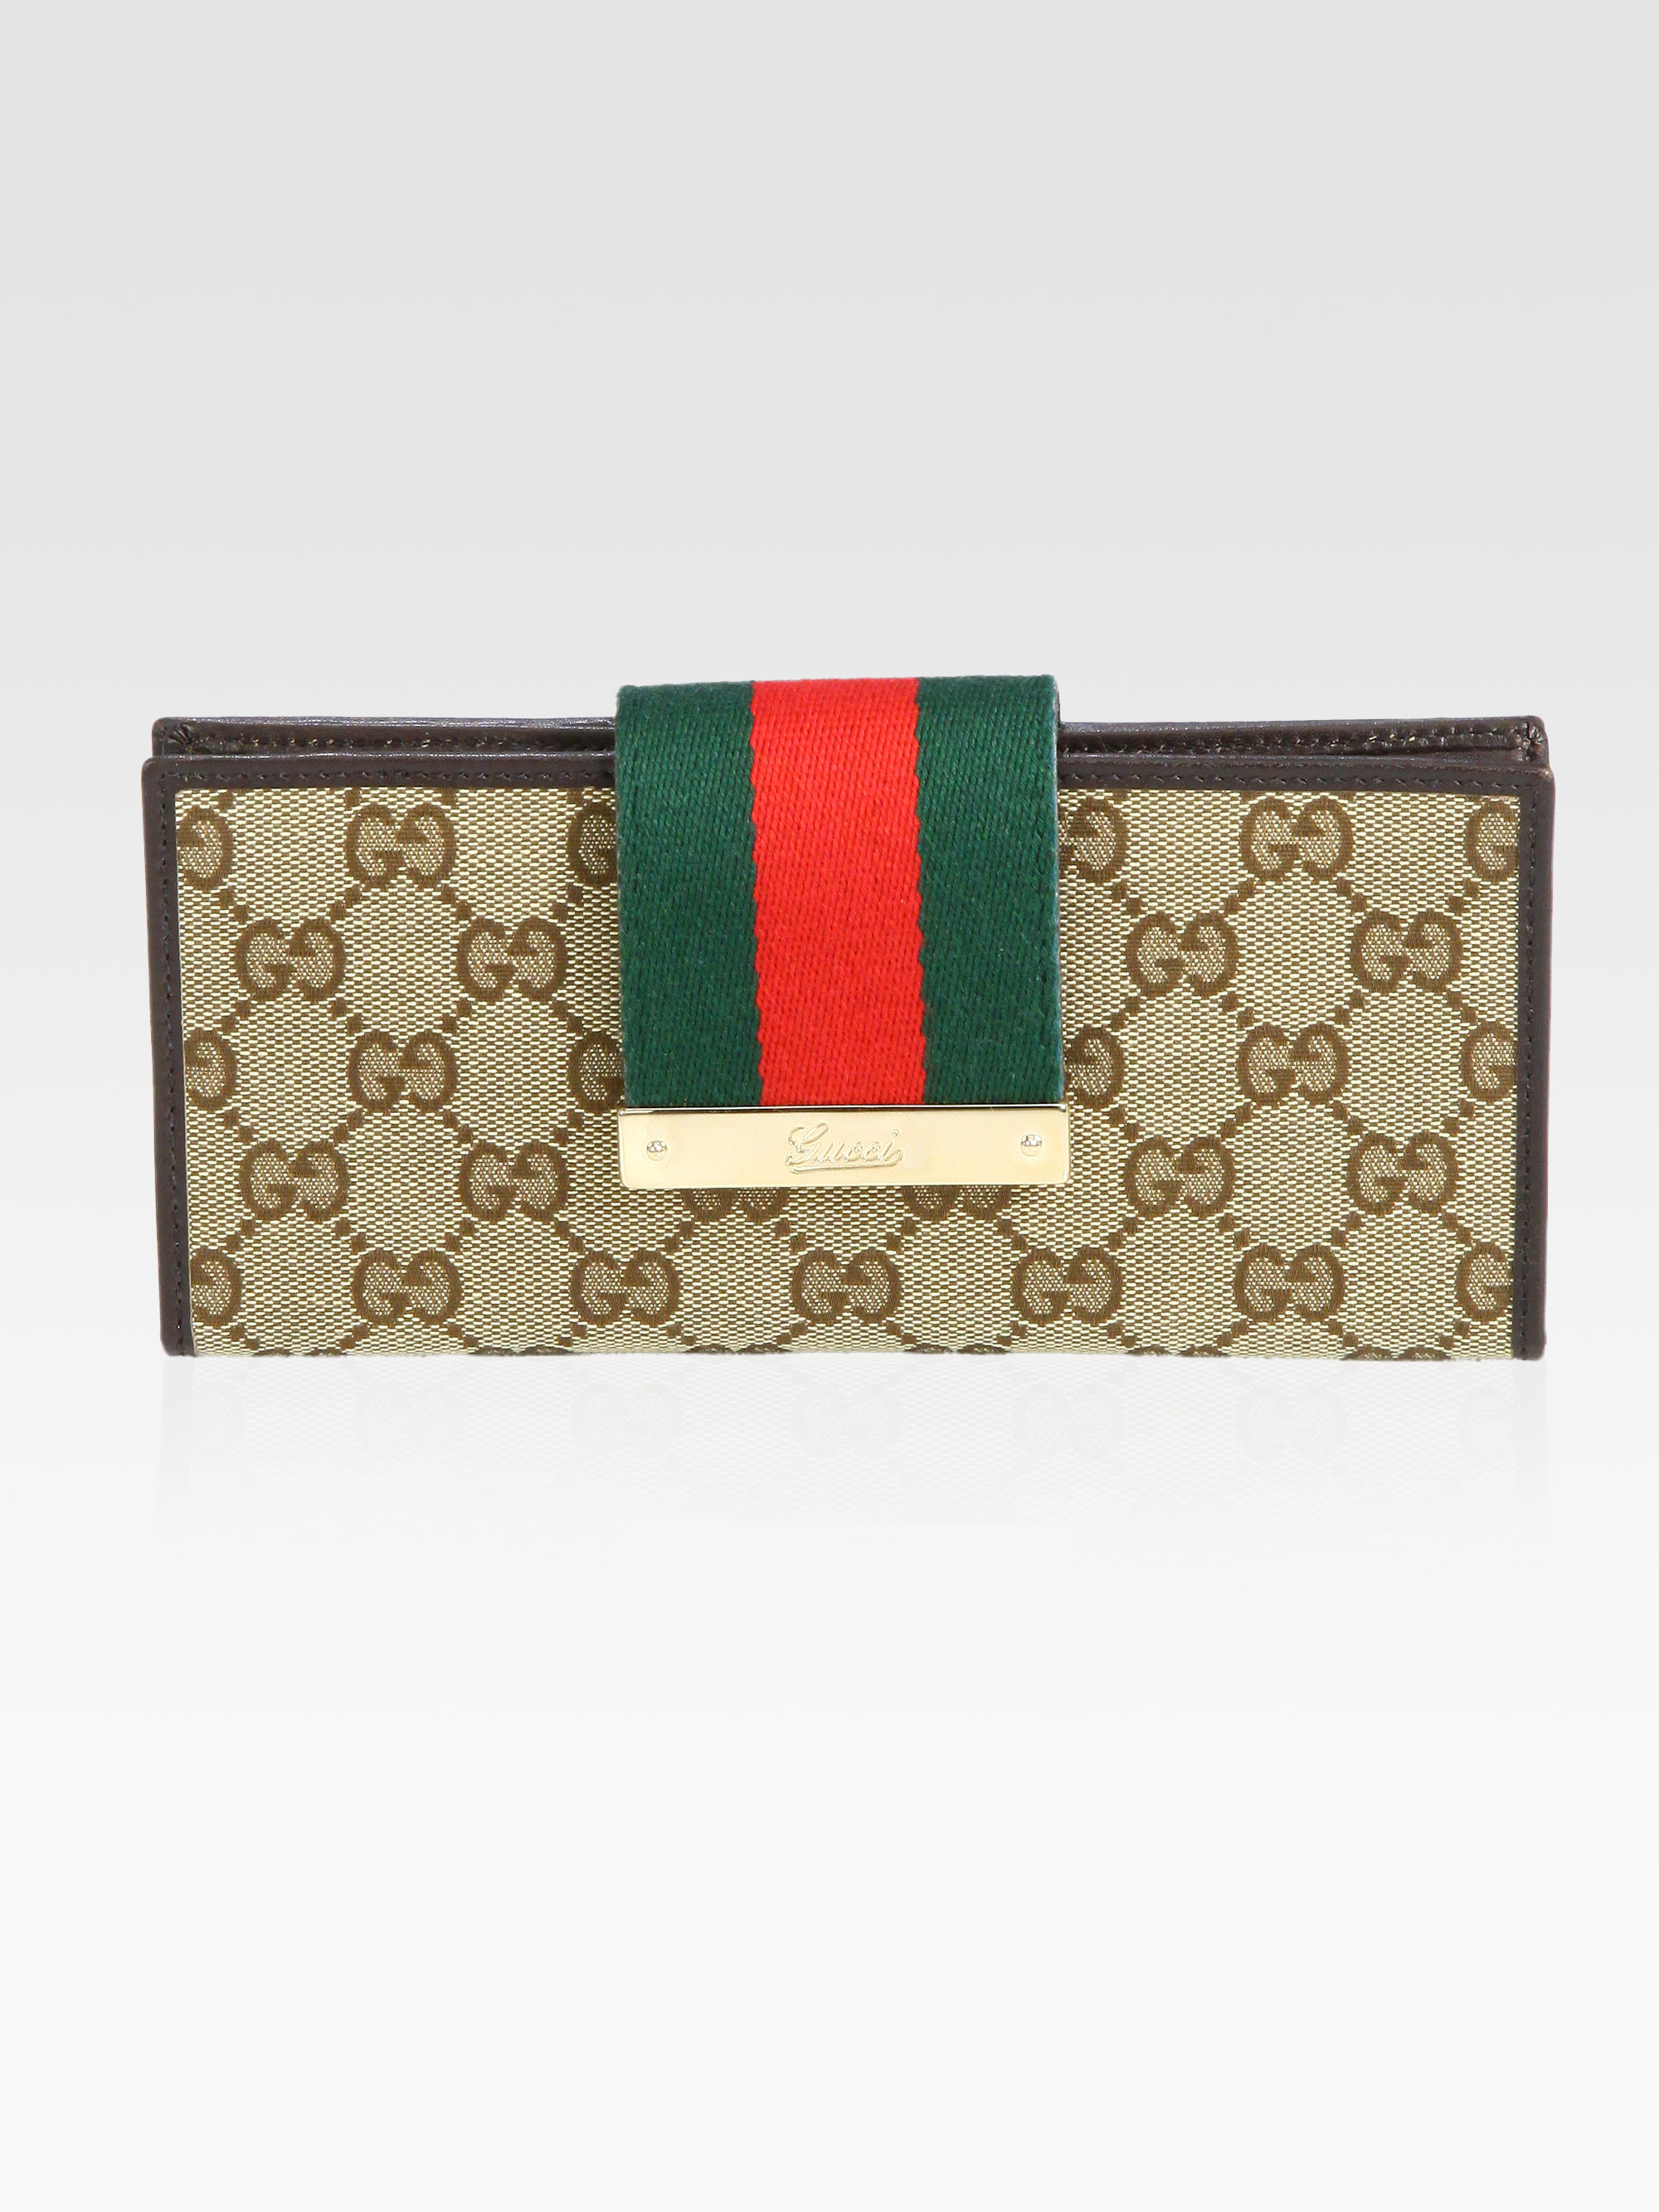 Gucci Ladies Web Gg Canvas Continental Wallet in Cocoa Beige (Brown) - Lyst